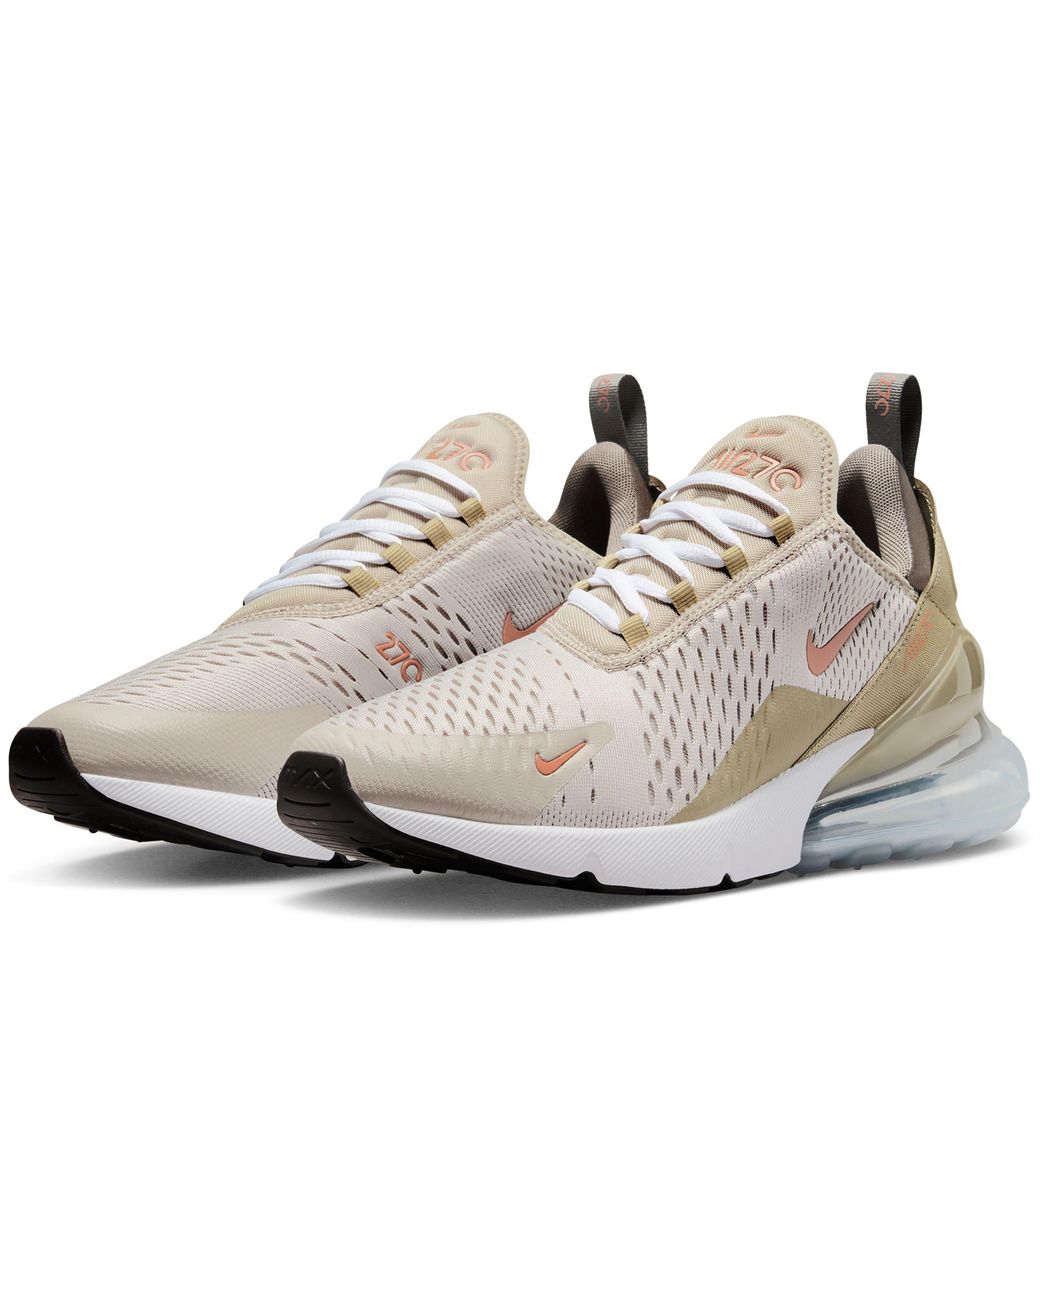 Nike Rubber Air Max 270 Shoes in Cream/Light Brown/Grey (Gray) for Men |  Lyst